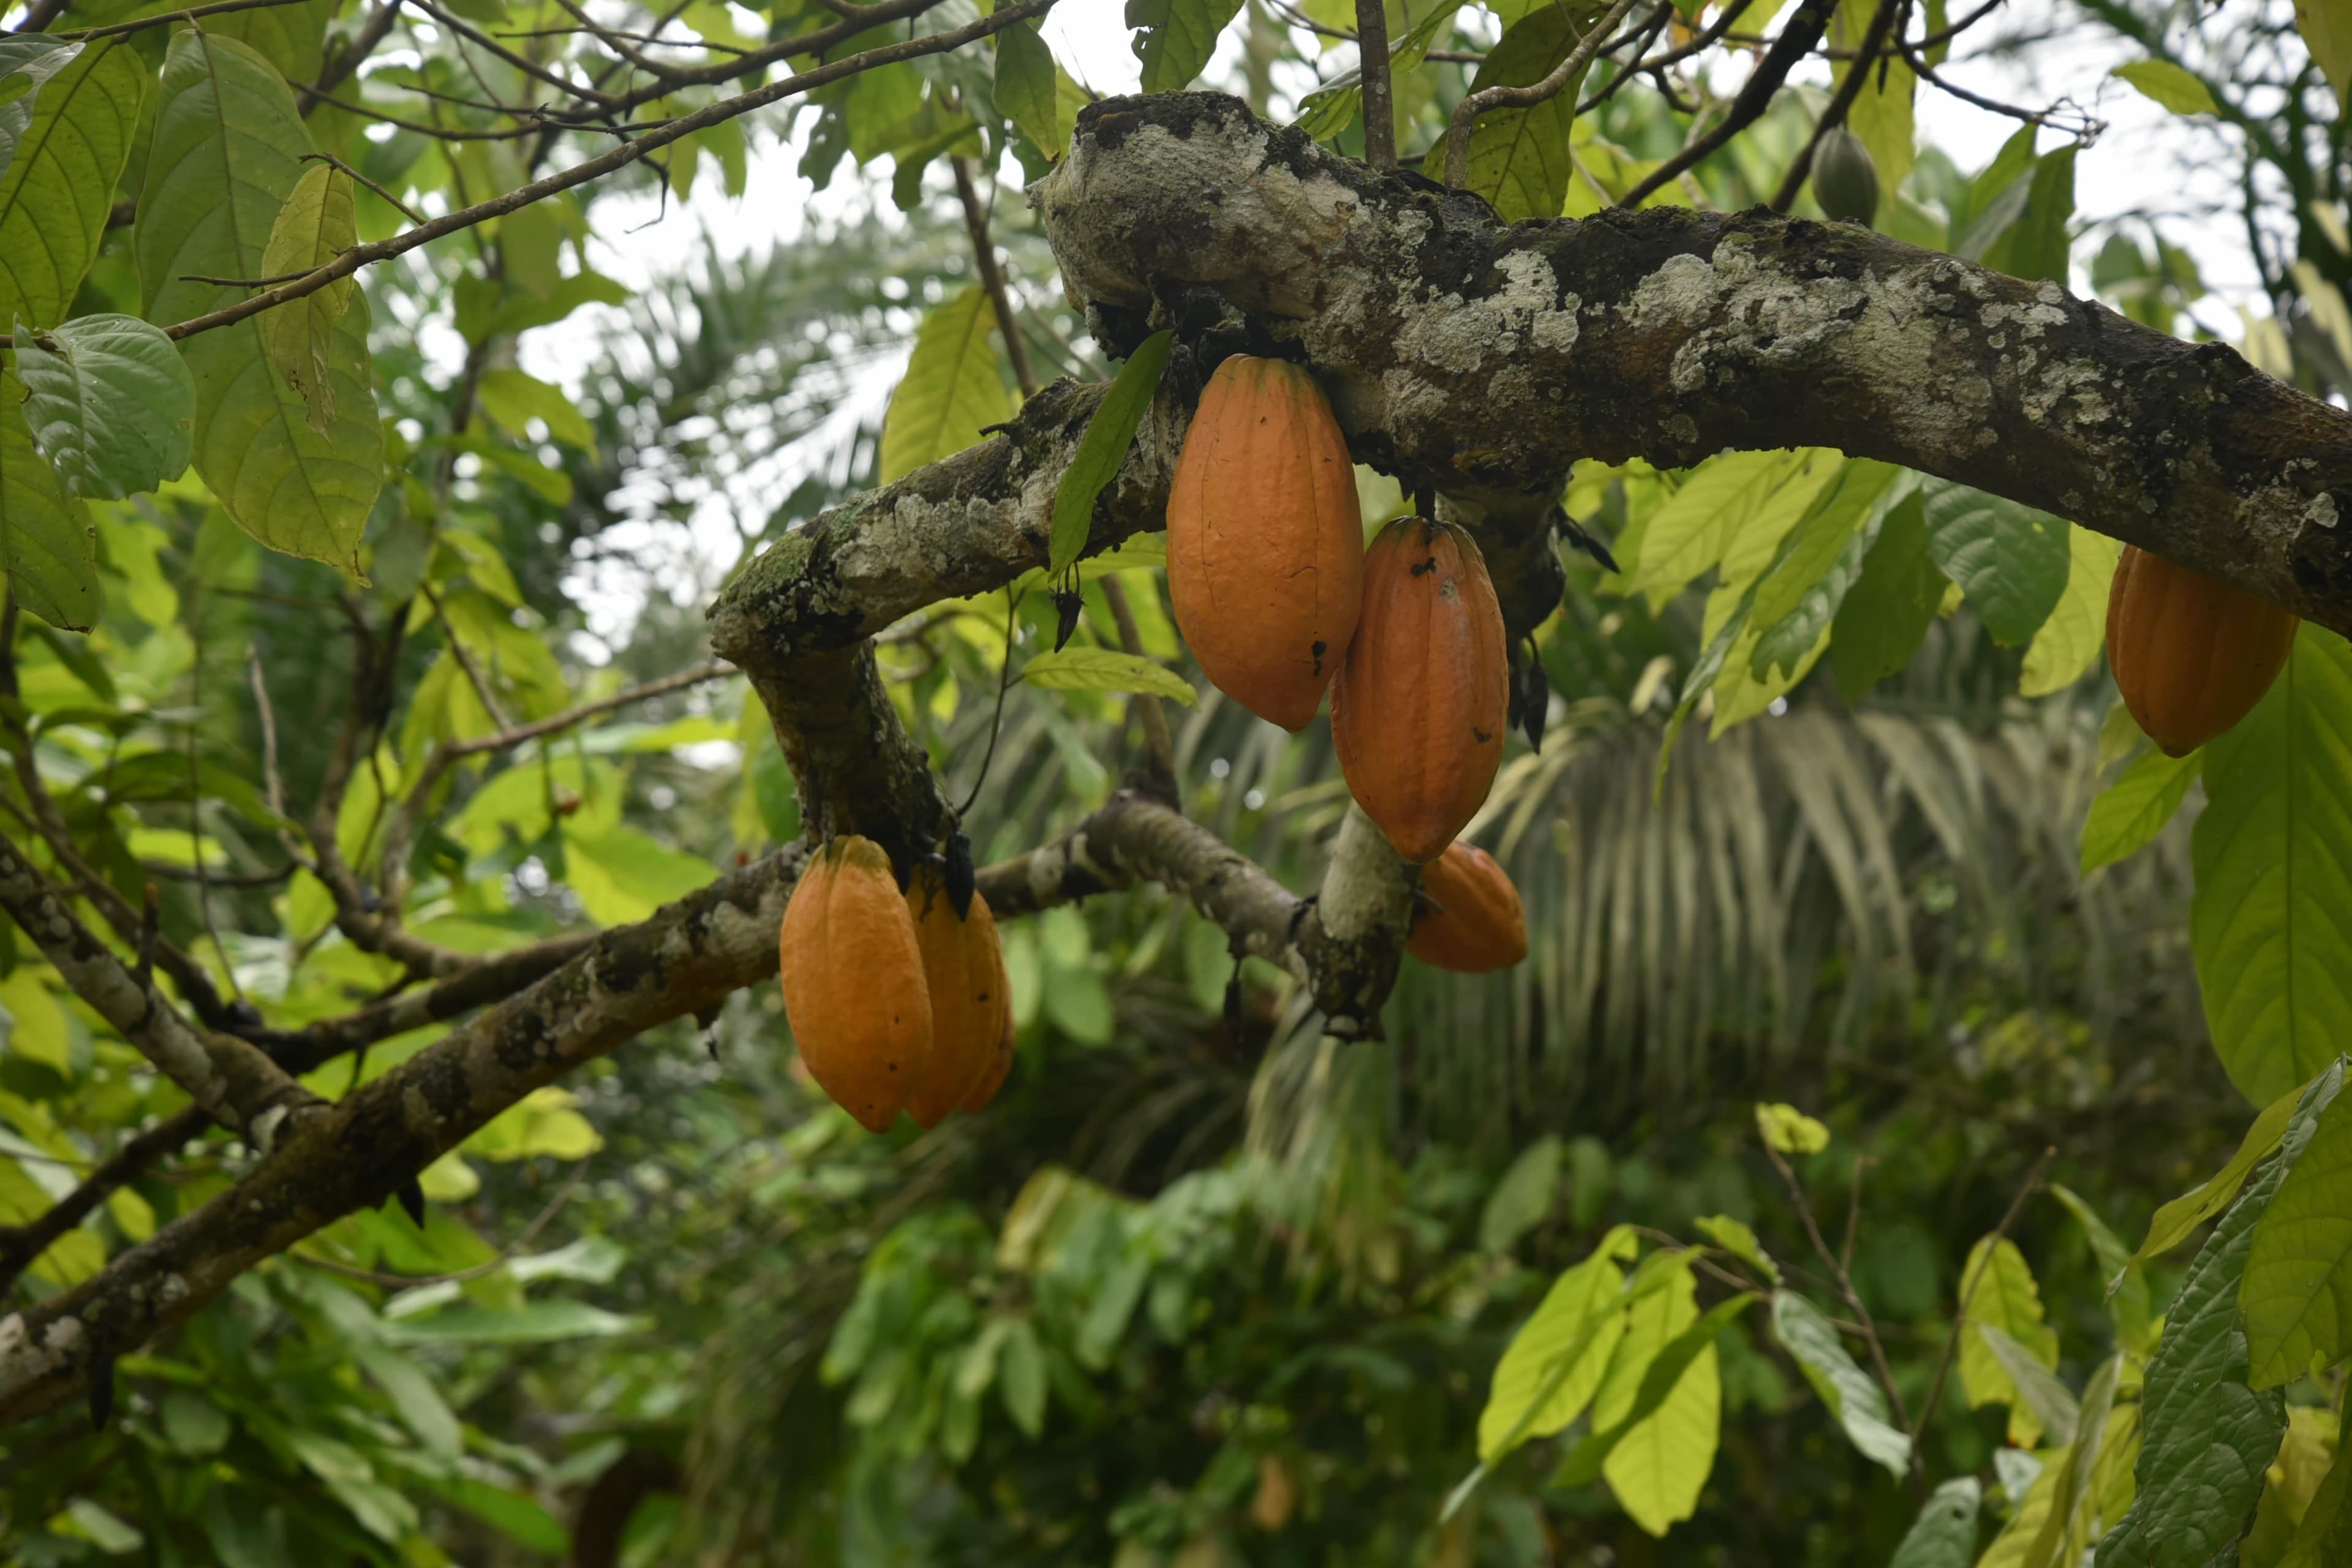 Joint Framework for Action – Roadmap to Deforestation-free Cocoa